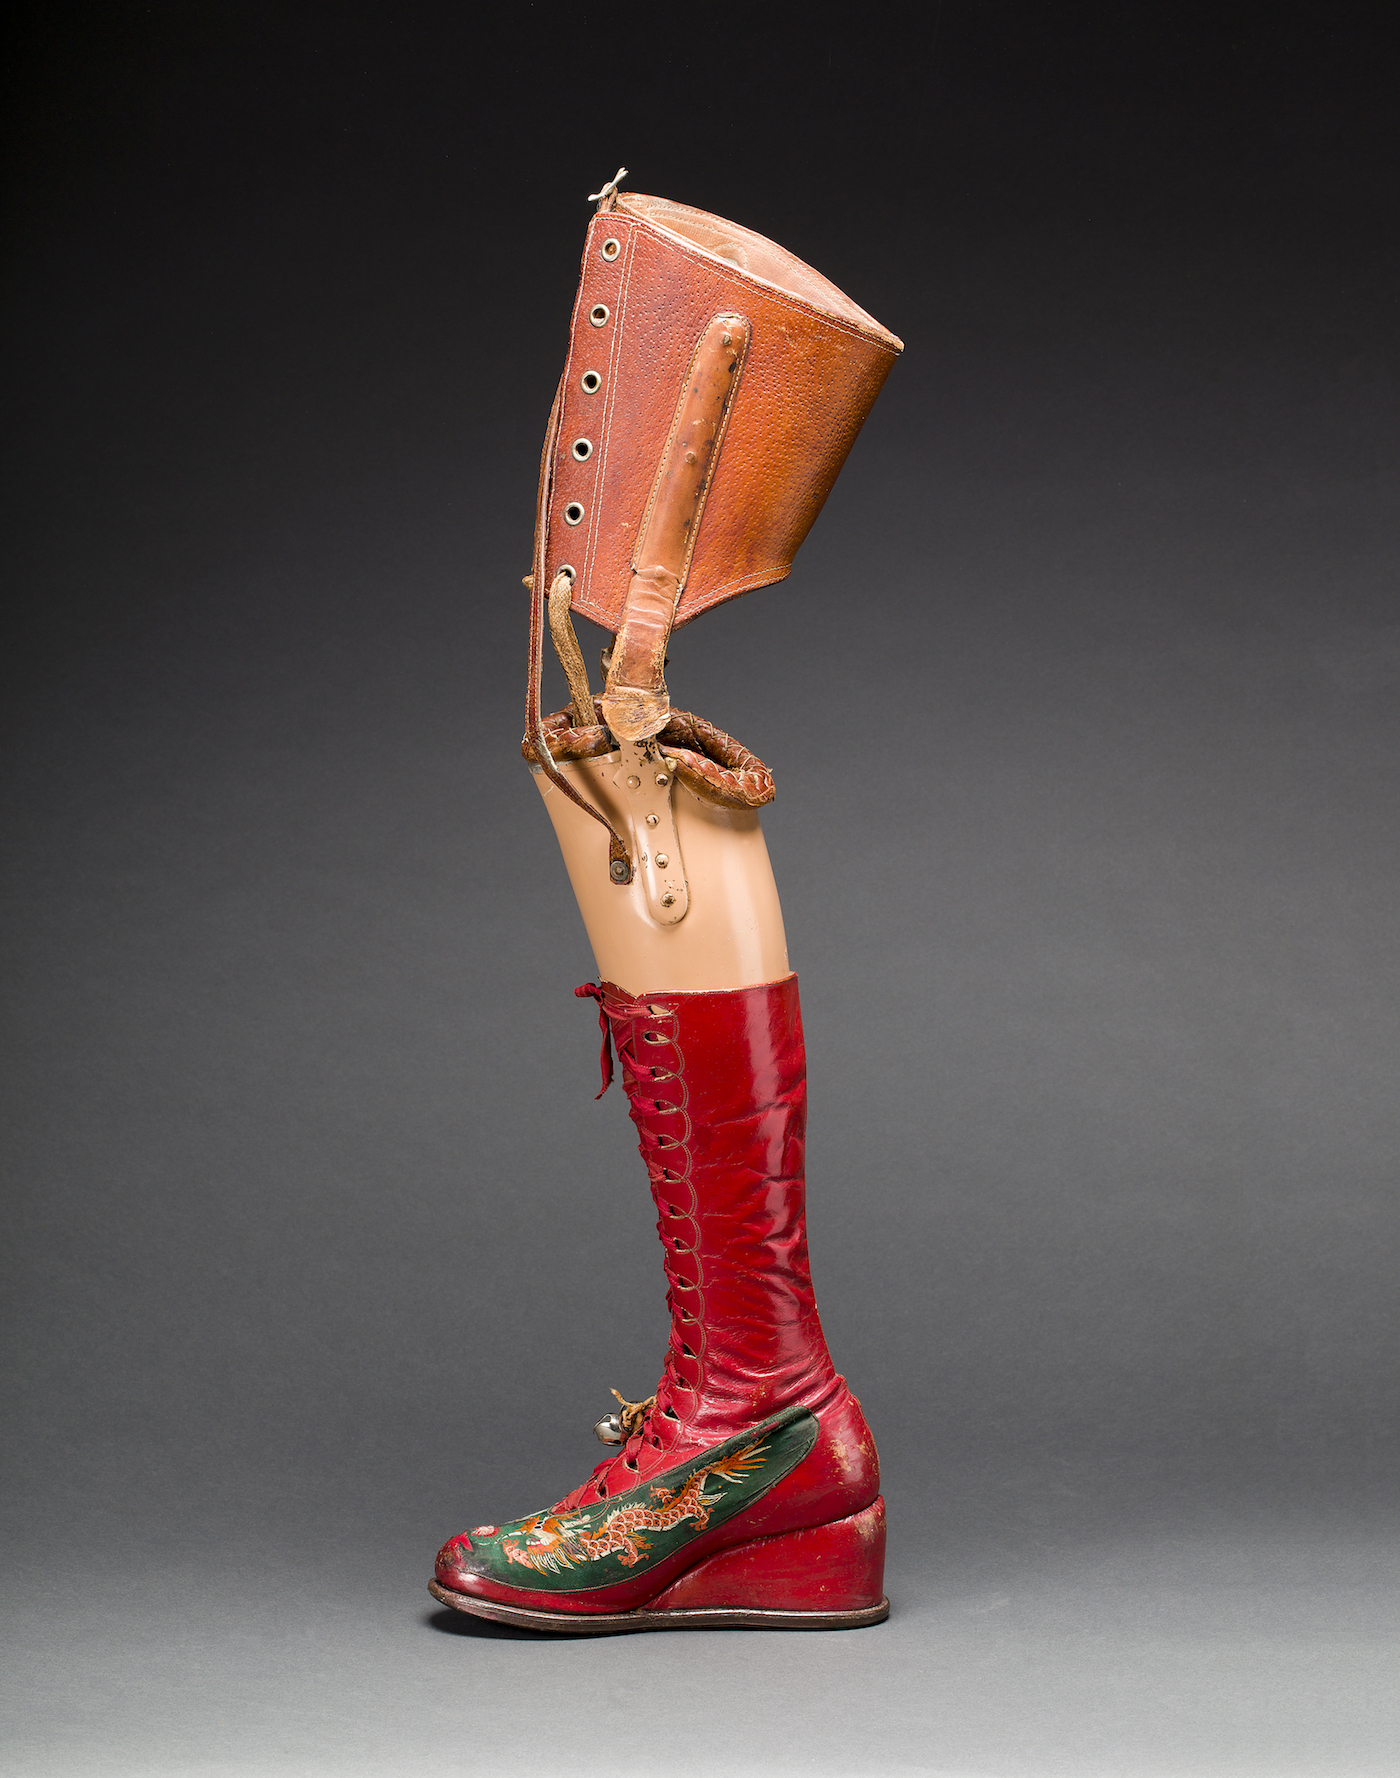 Prosthetic leg with leather boot. Appliquéd silk with embroidered Chinese motifs. From Frida Kahlo: Making Her Self Up, 16 June-14 November. Photograph Javier Hinojosa. Museo Frida Kahlo. Diego Riviera and Frida Kahlo Archives